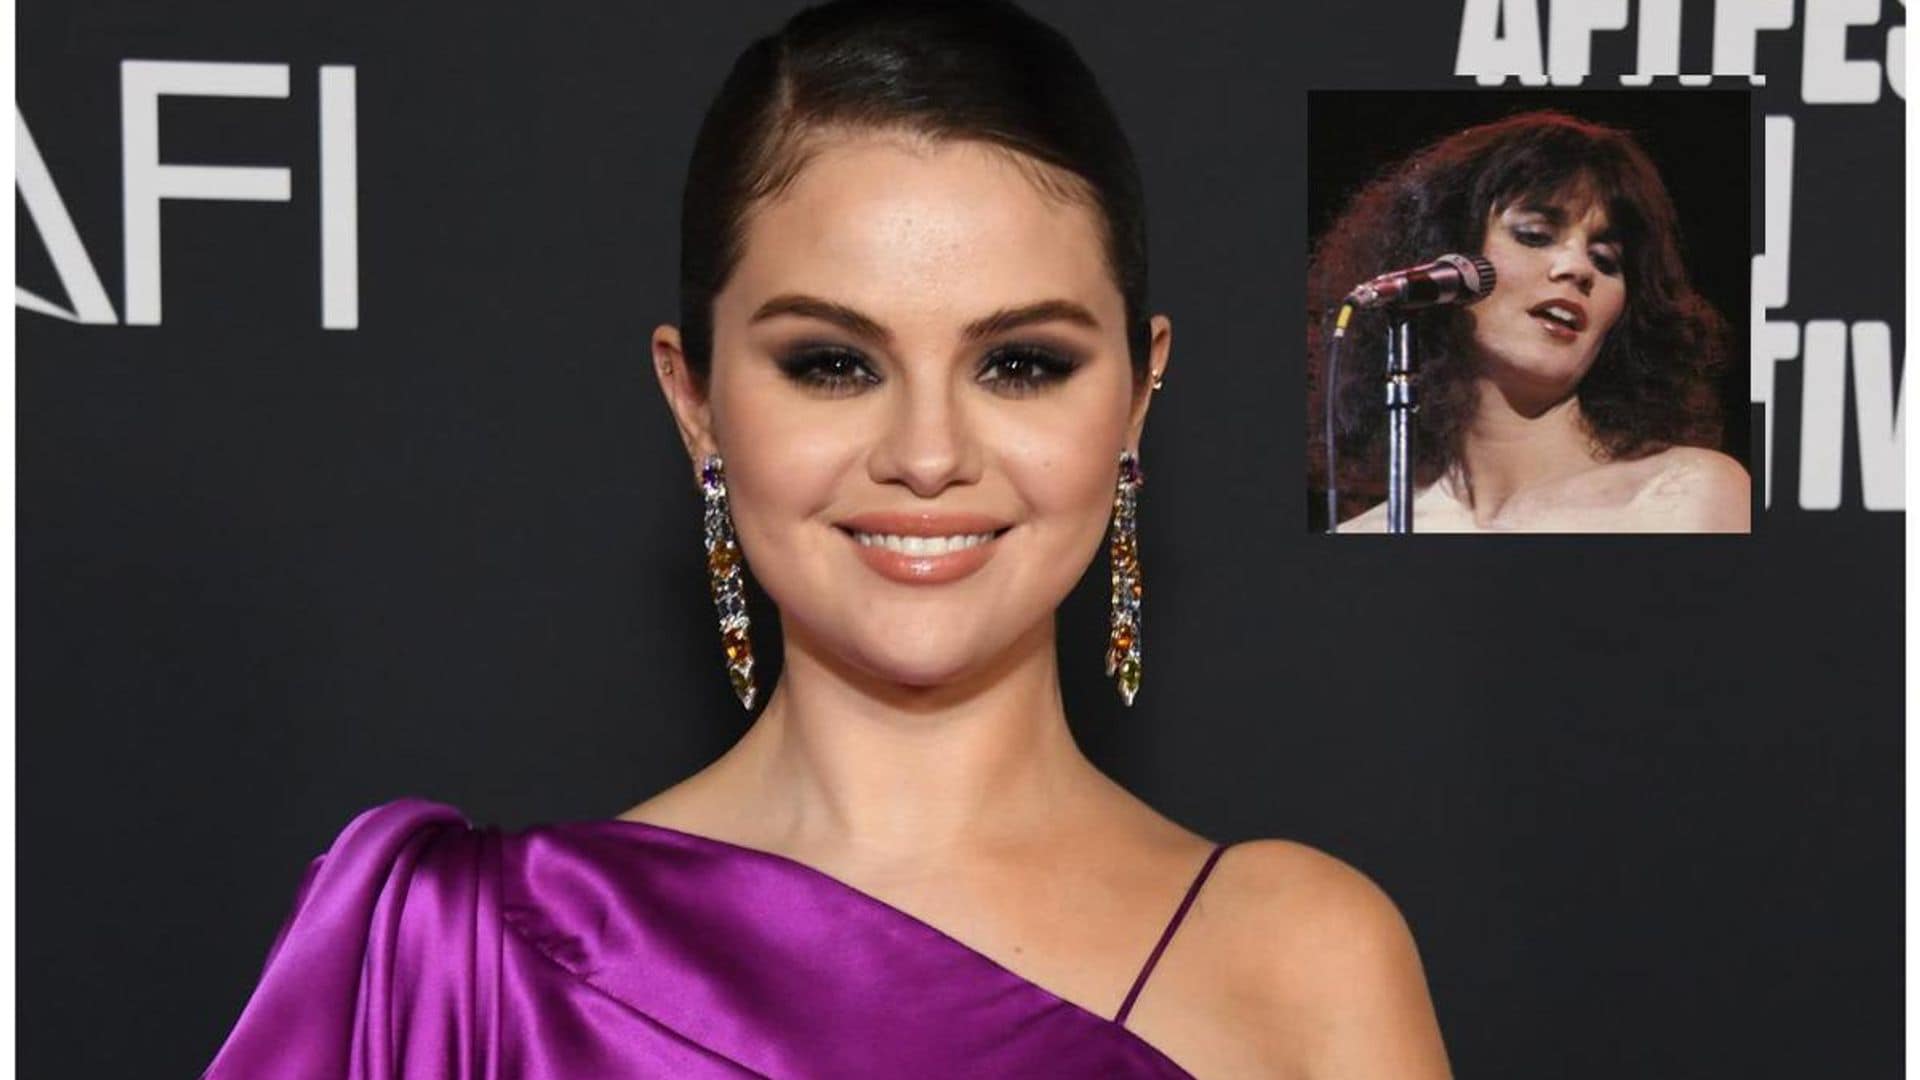 Why fans think Selena Gomez would be the perfect Linda Ronstadt in a movie